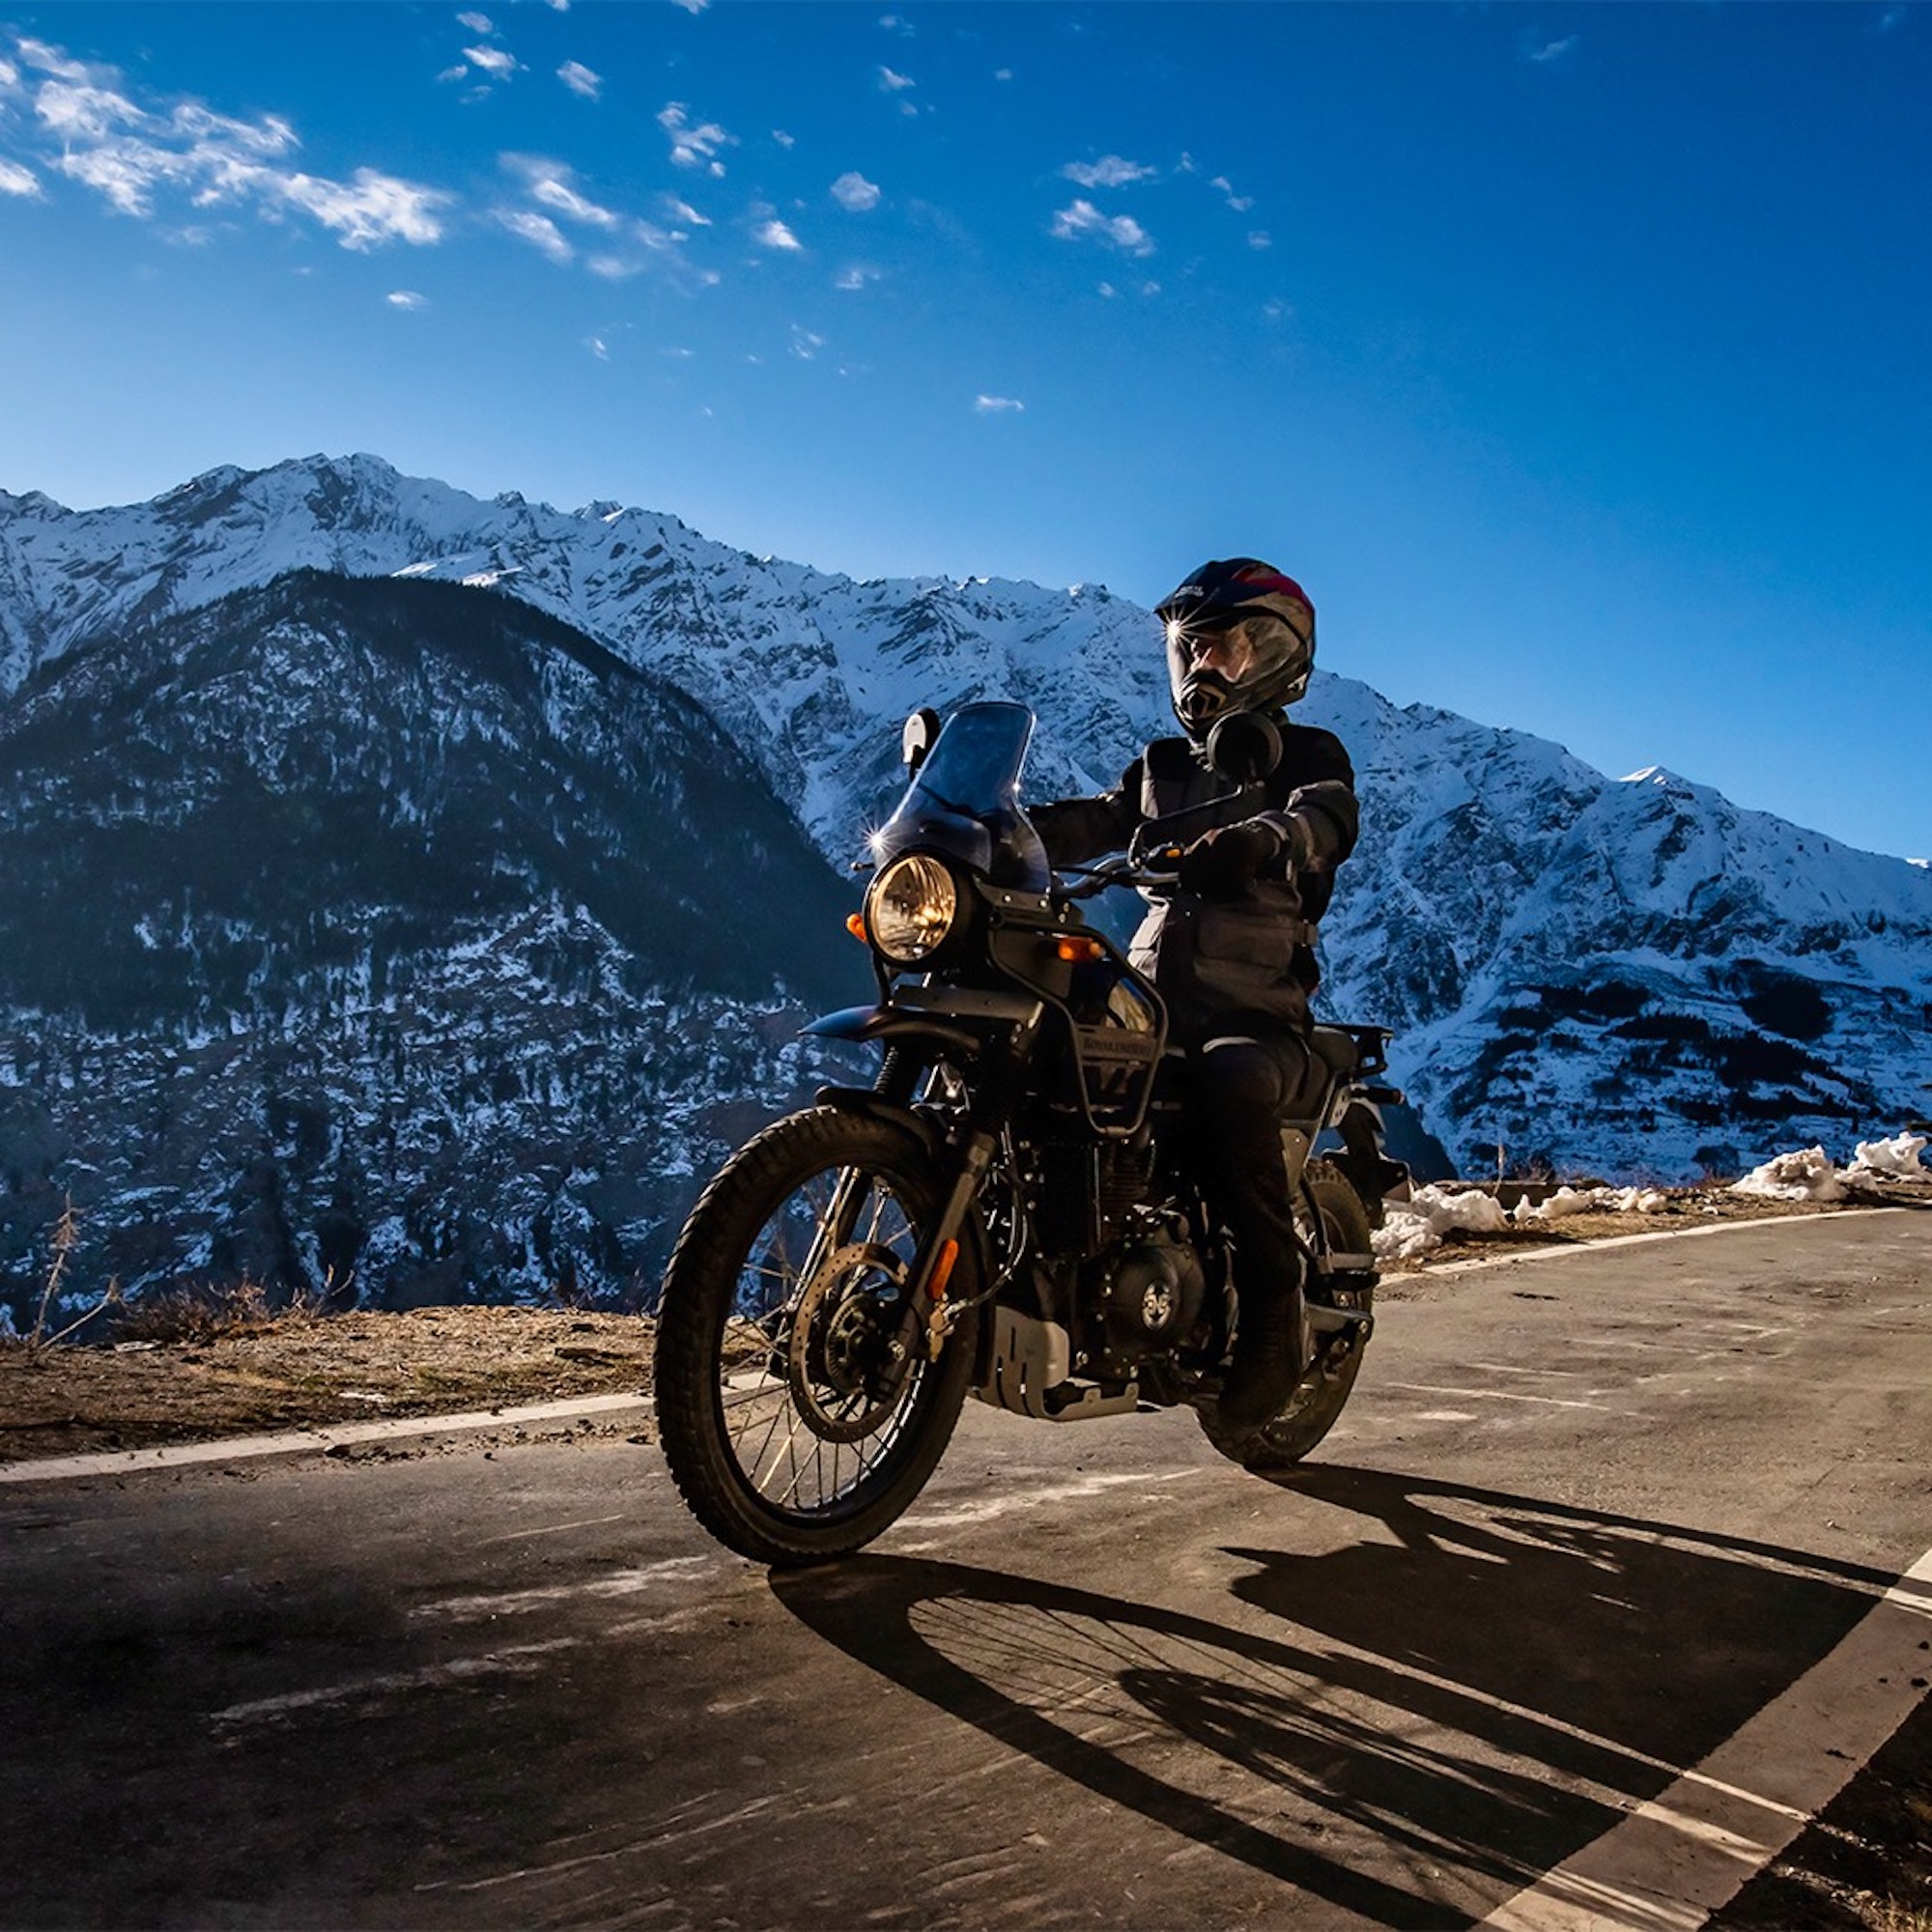 A view of Royal Enfield's Himalayan. Media sourced from Royal Enfield.